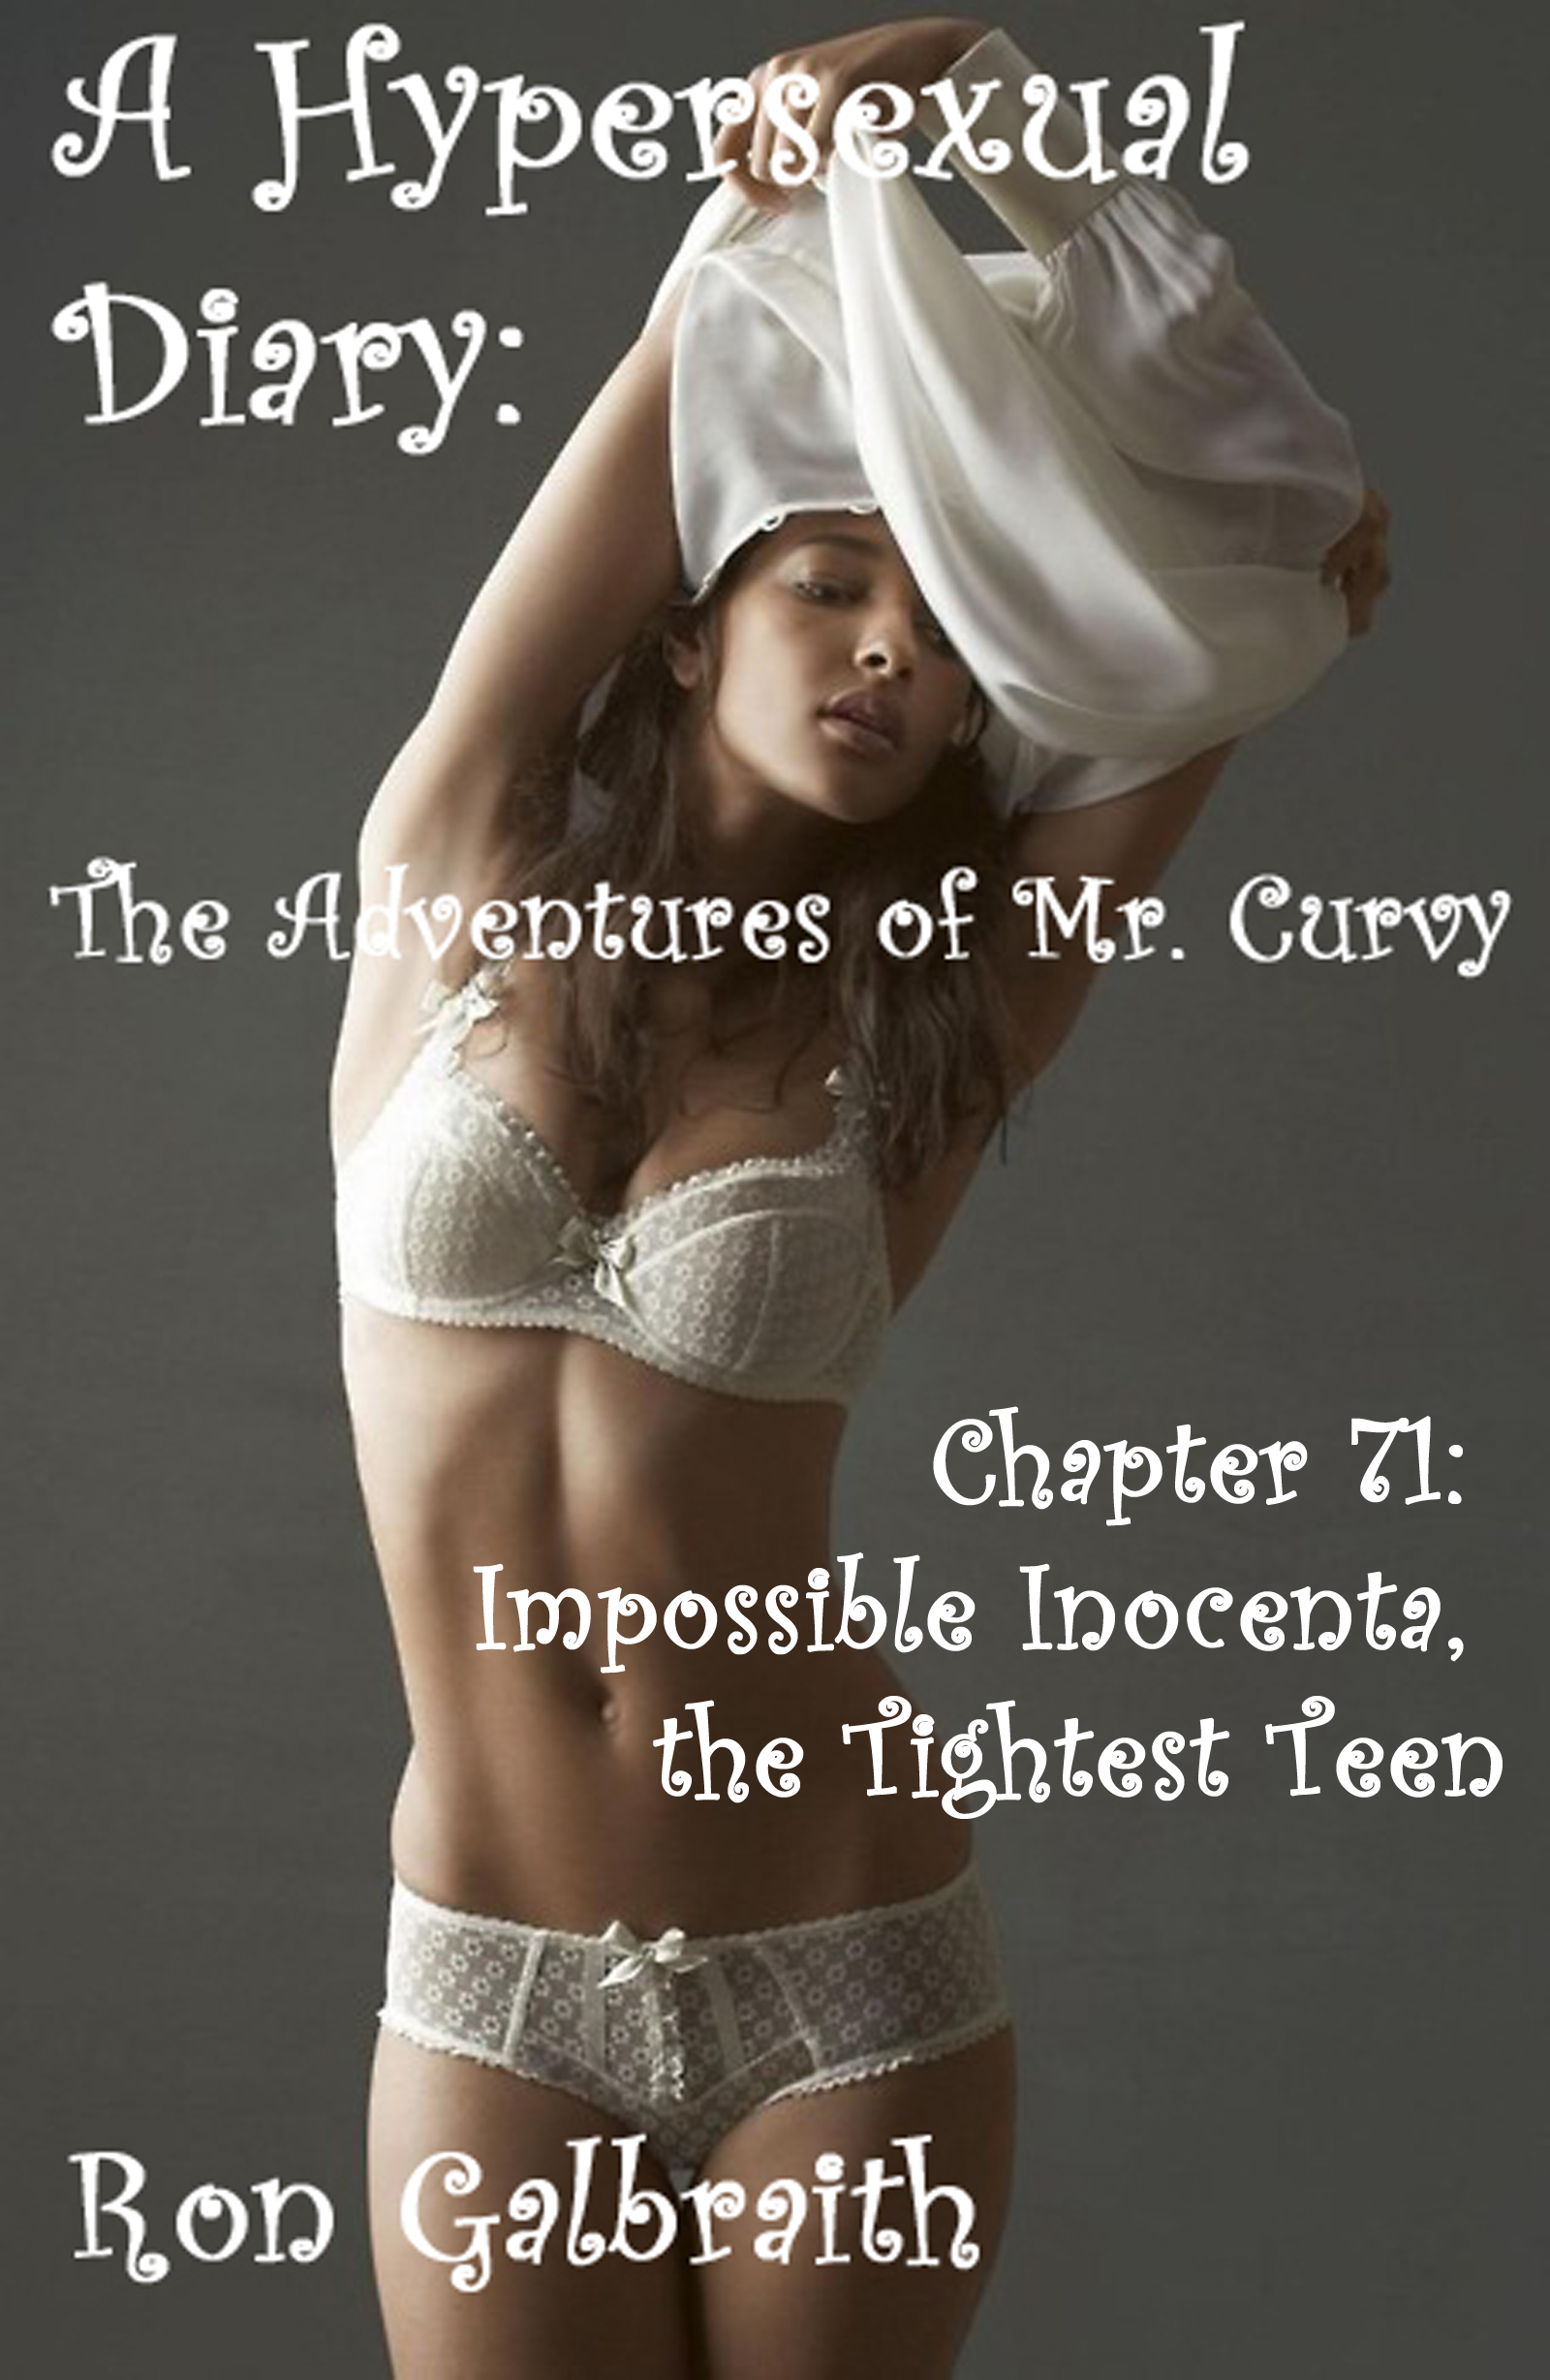 Tightest Teen - Impossible Inocenta, the Tightest Teen (A Hypersexual Diary: The Adventures  of Mr. Curvy, Chapter 71), an Ebook by Ron Galbraith